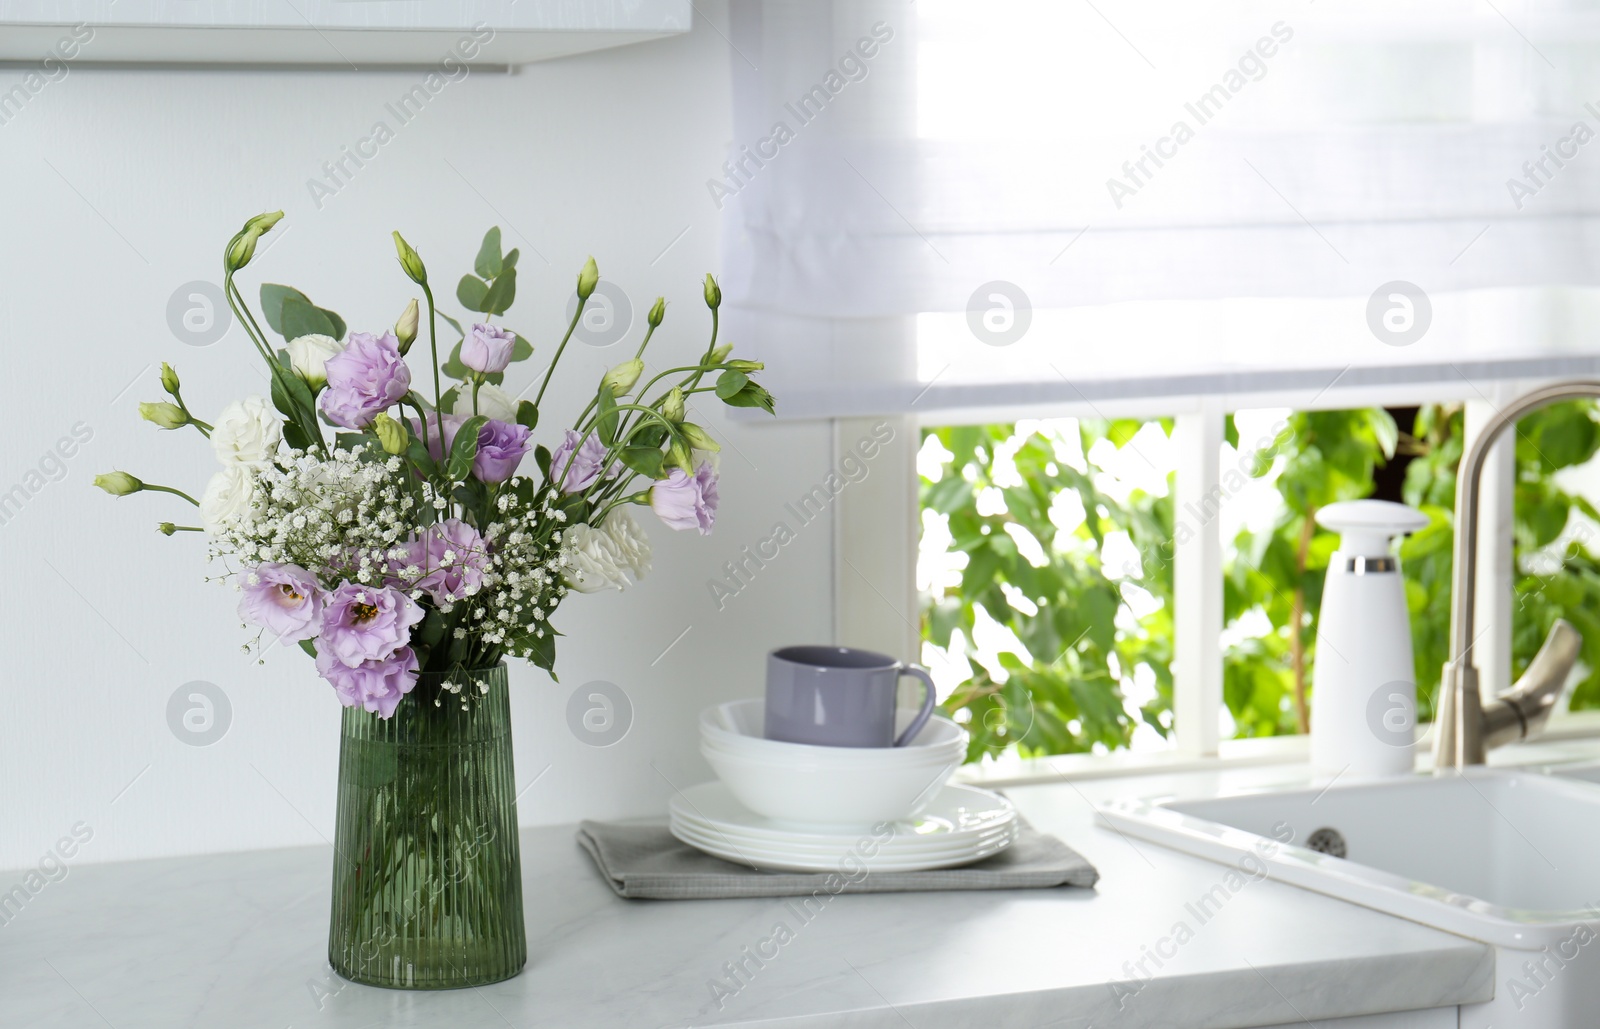 Photo of Beautiful bouquet with Eustoma flowers and dishware on countertop in kitchen. Space for text